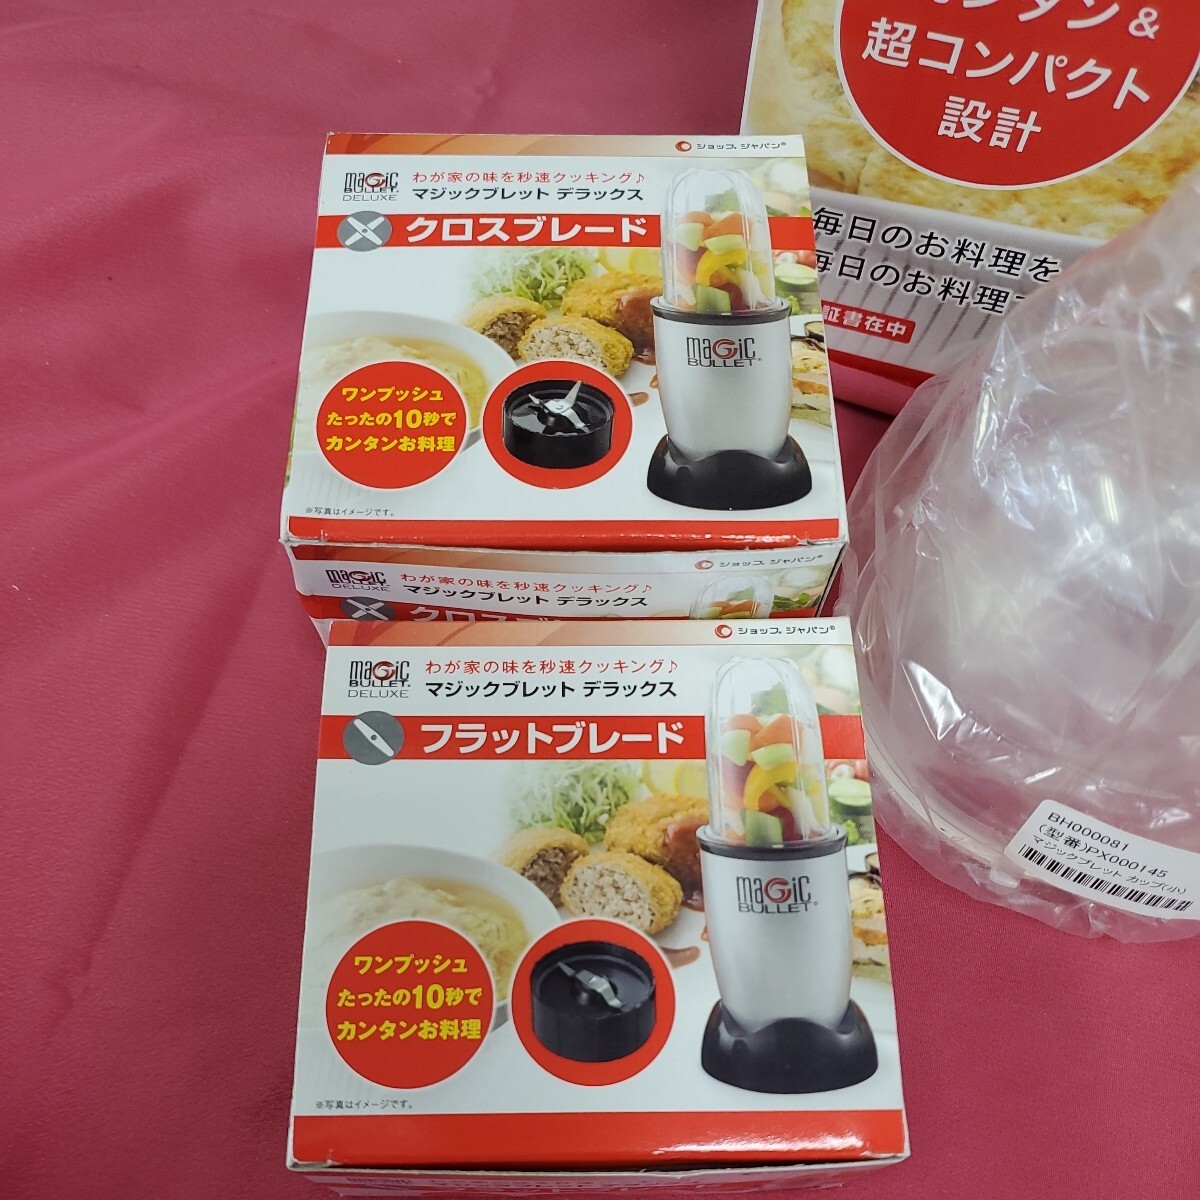 * unused storage goods shop Japan Magic Brett Deluxe cup small blade preliminary attached juicer mixer magic 166-32